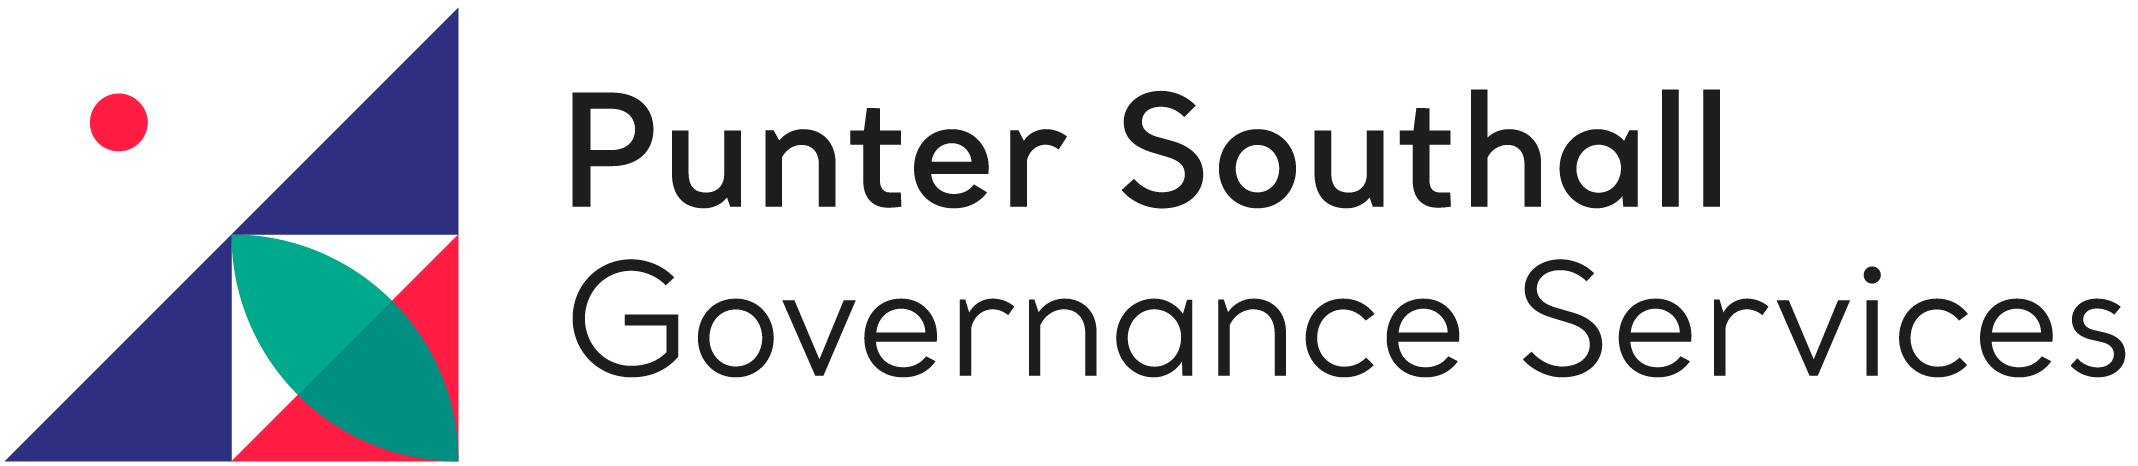 Punter Southall Governance Services